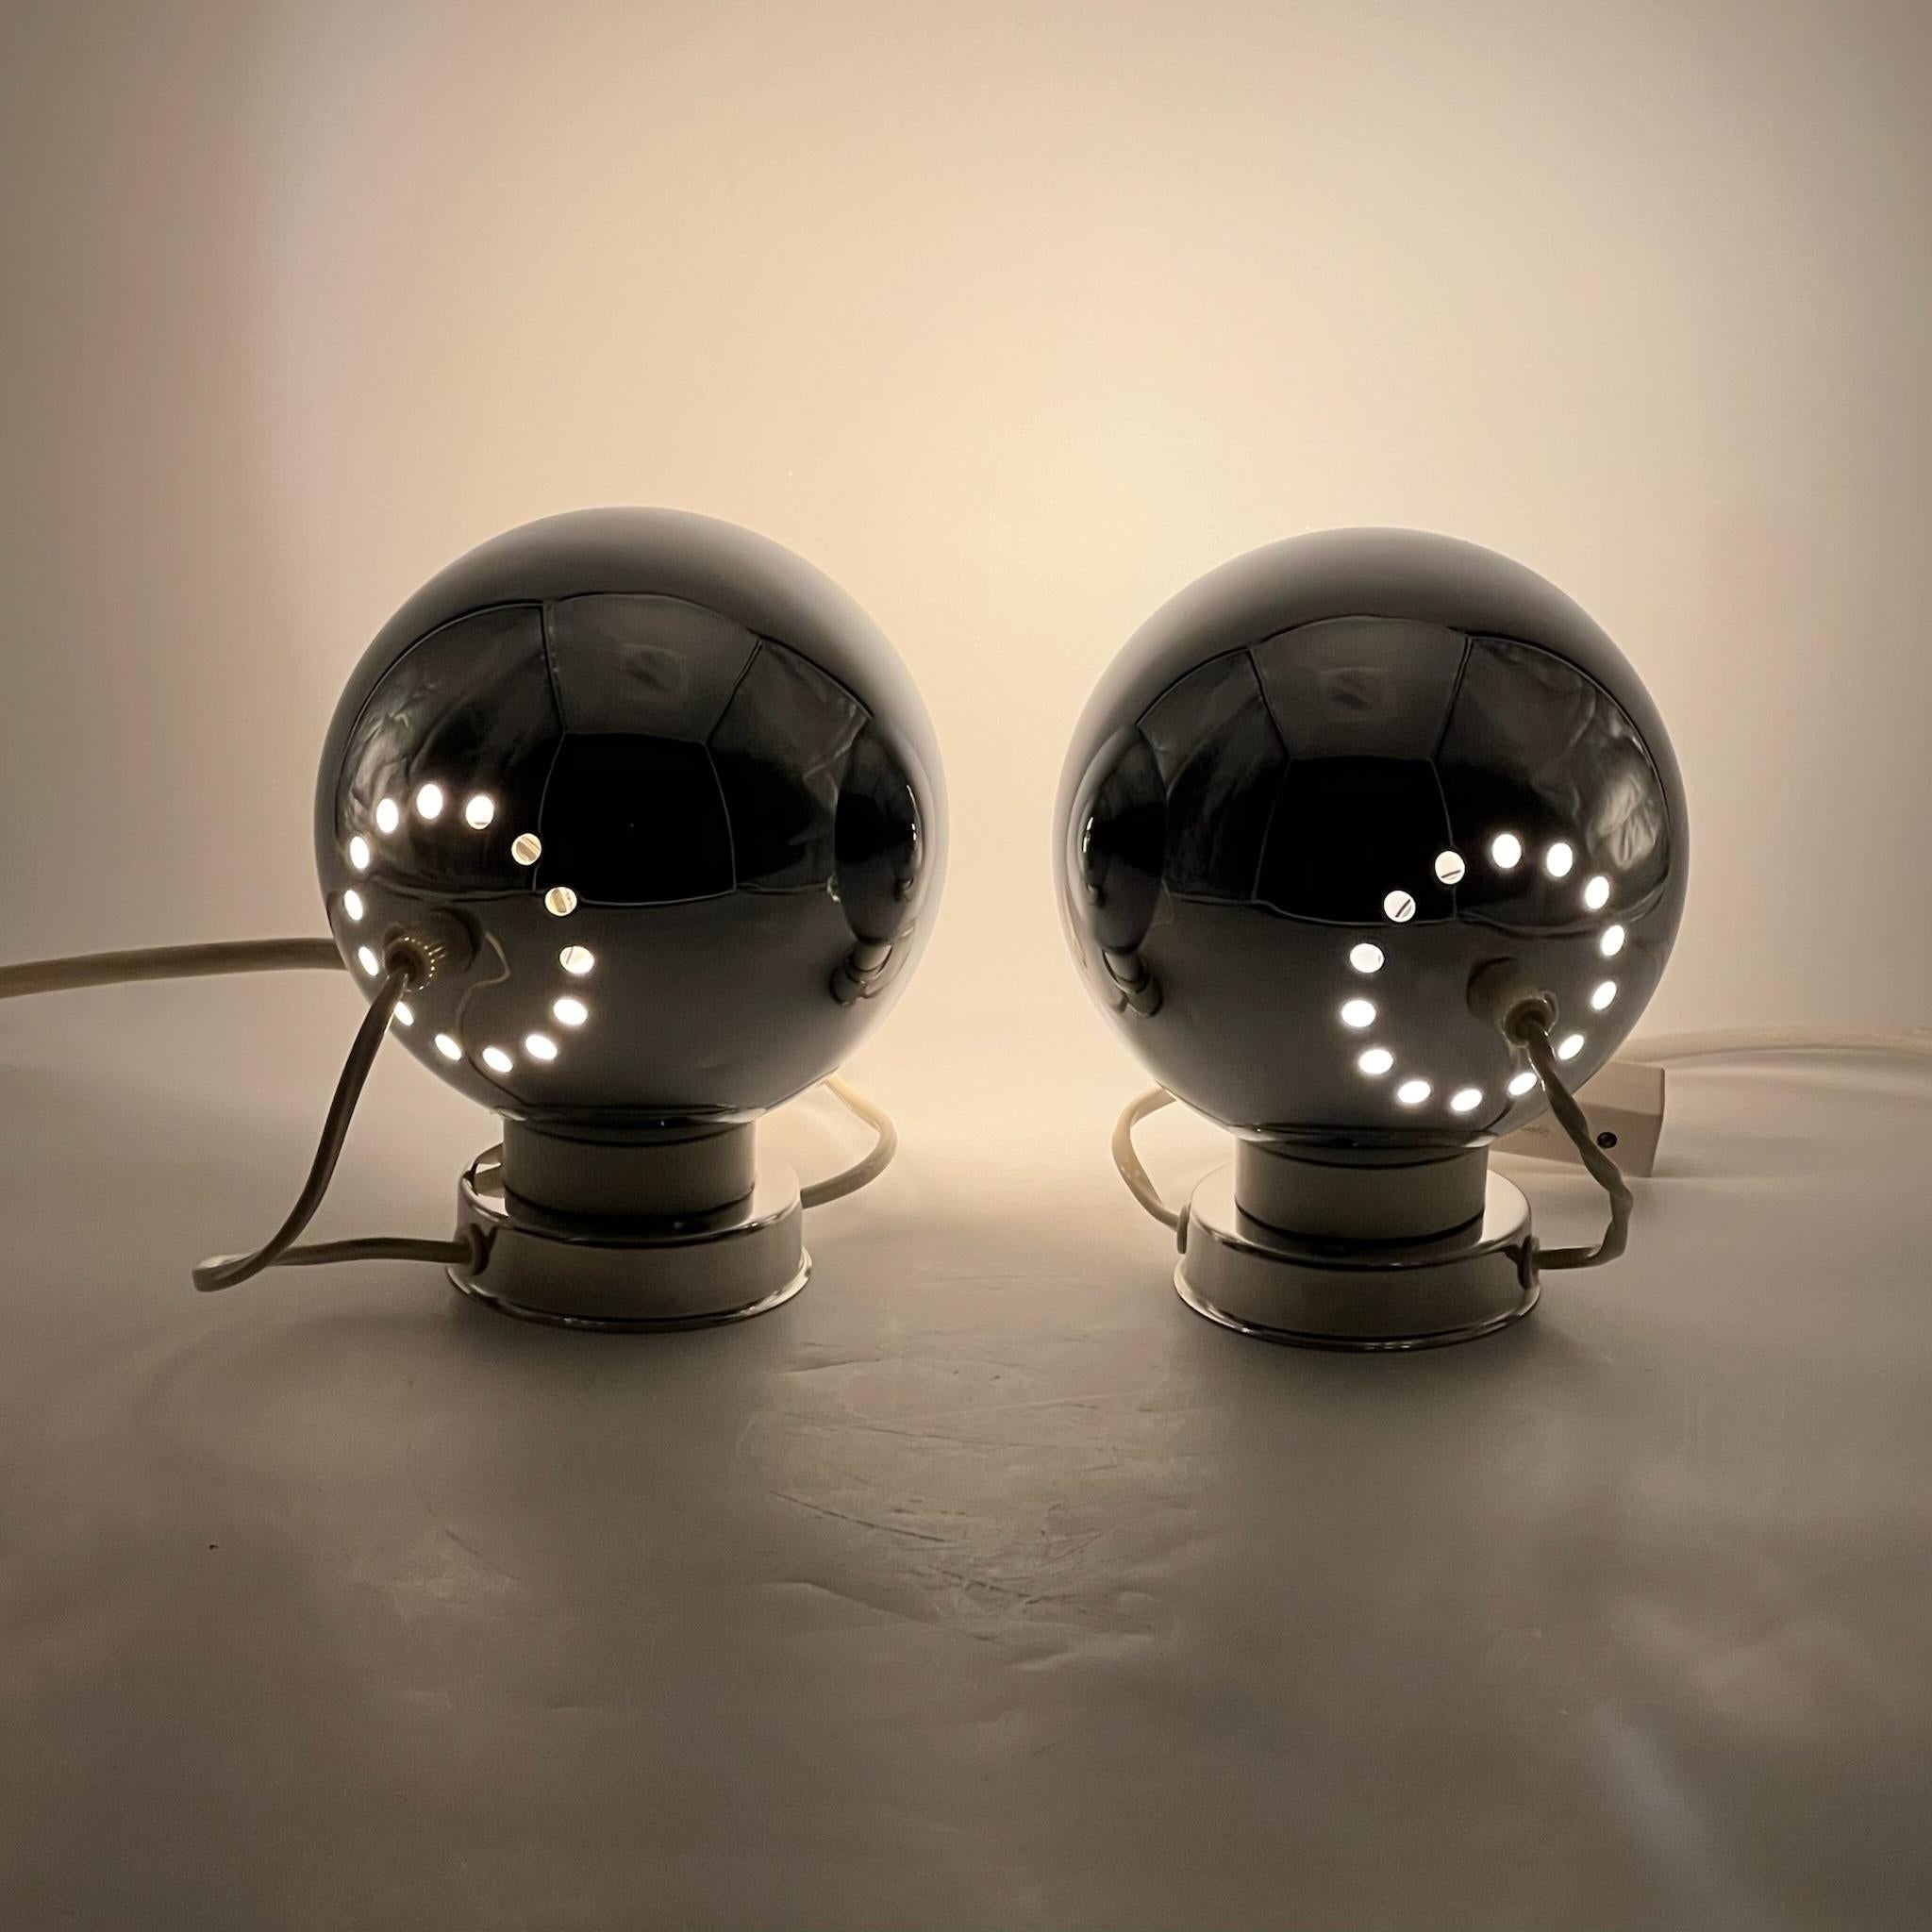 Metal Iconic Reggiani 'Eyeball' Lamps 60s - Pair of Vintage Masterpieces - Set of 2 For Sale